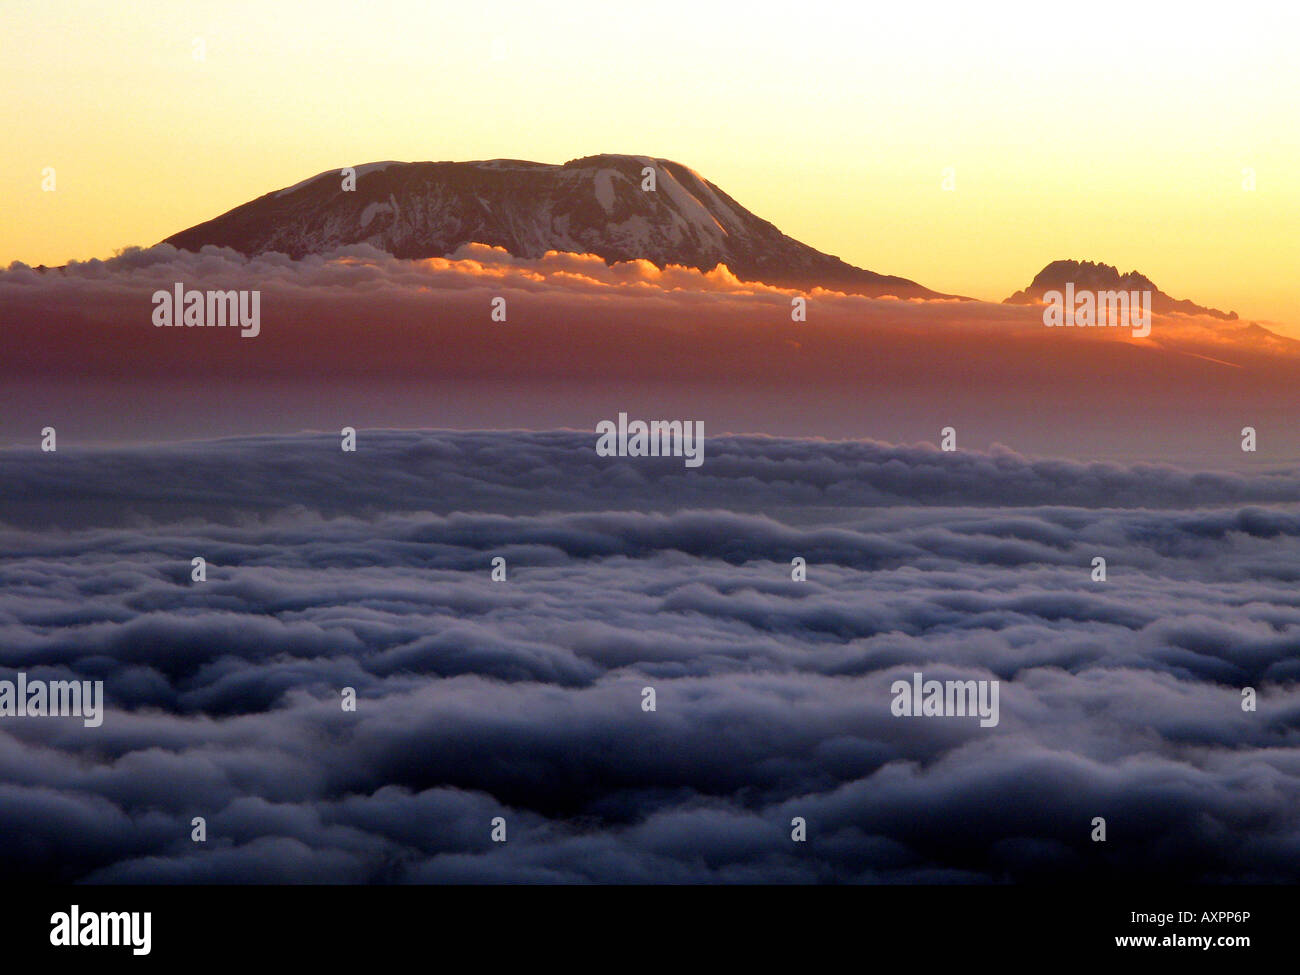 The summit of Kilimanjaro rising above the clouds, Tanzania, East Africa. The highest mountain in Africa, one the seven summits. Stock Photo